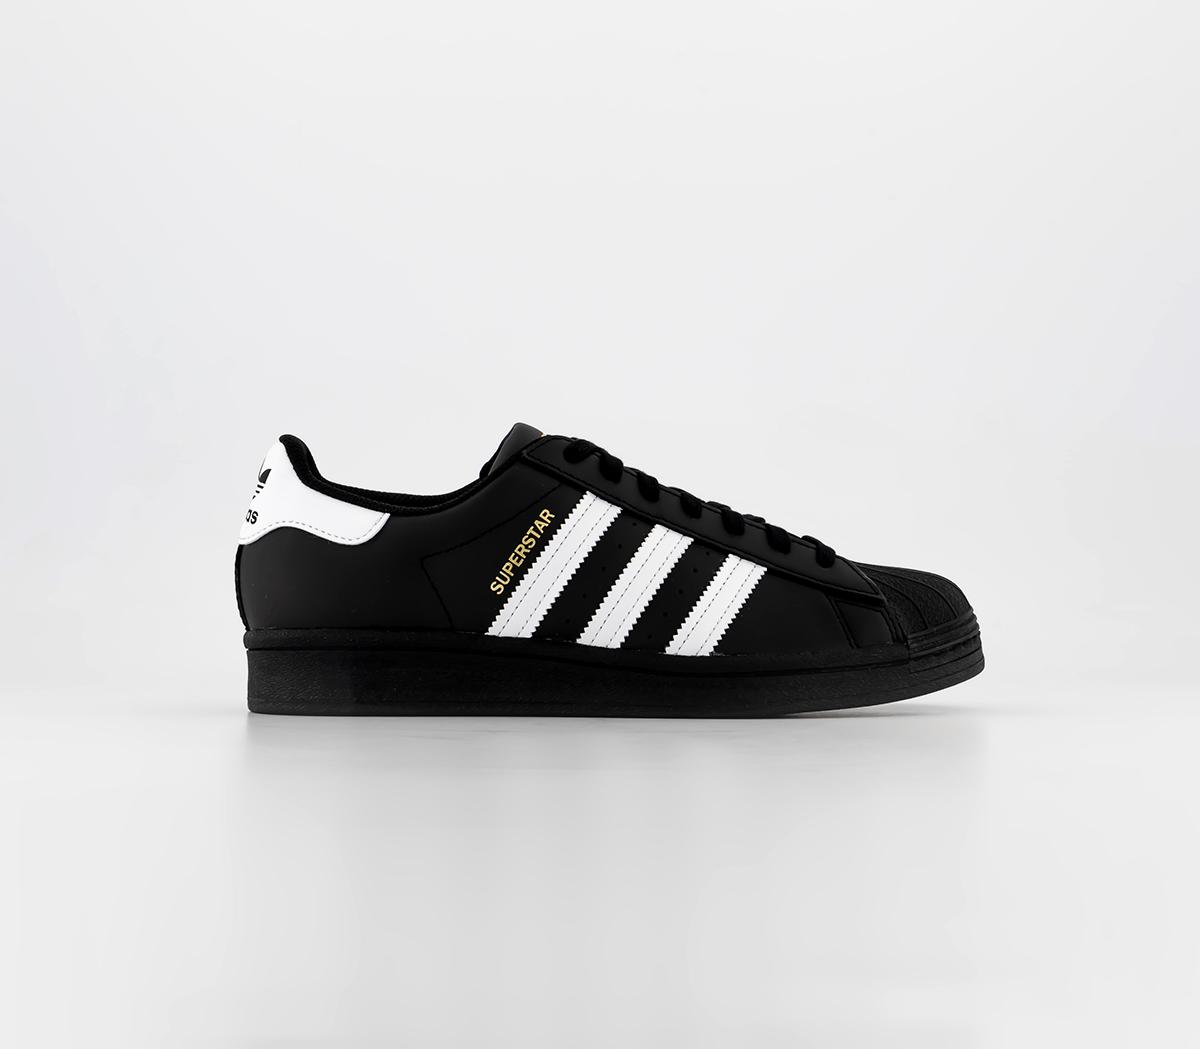 Adidas Kids Superstar Trainers Black White Leather In Black And White, 4